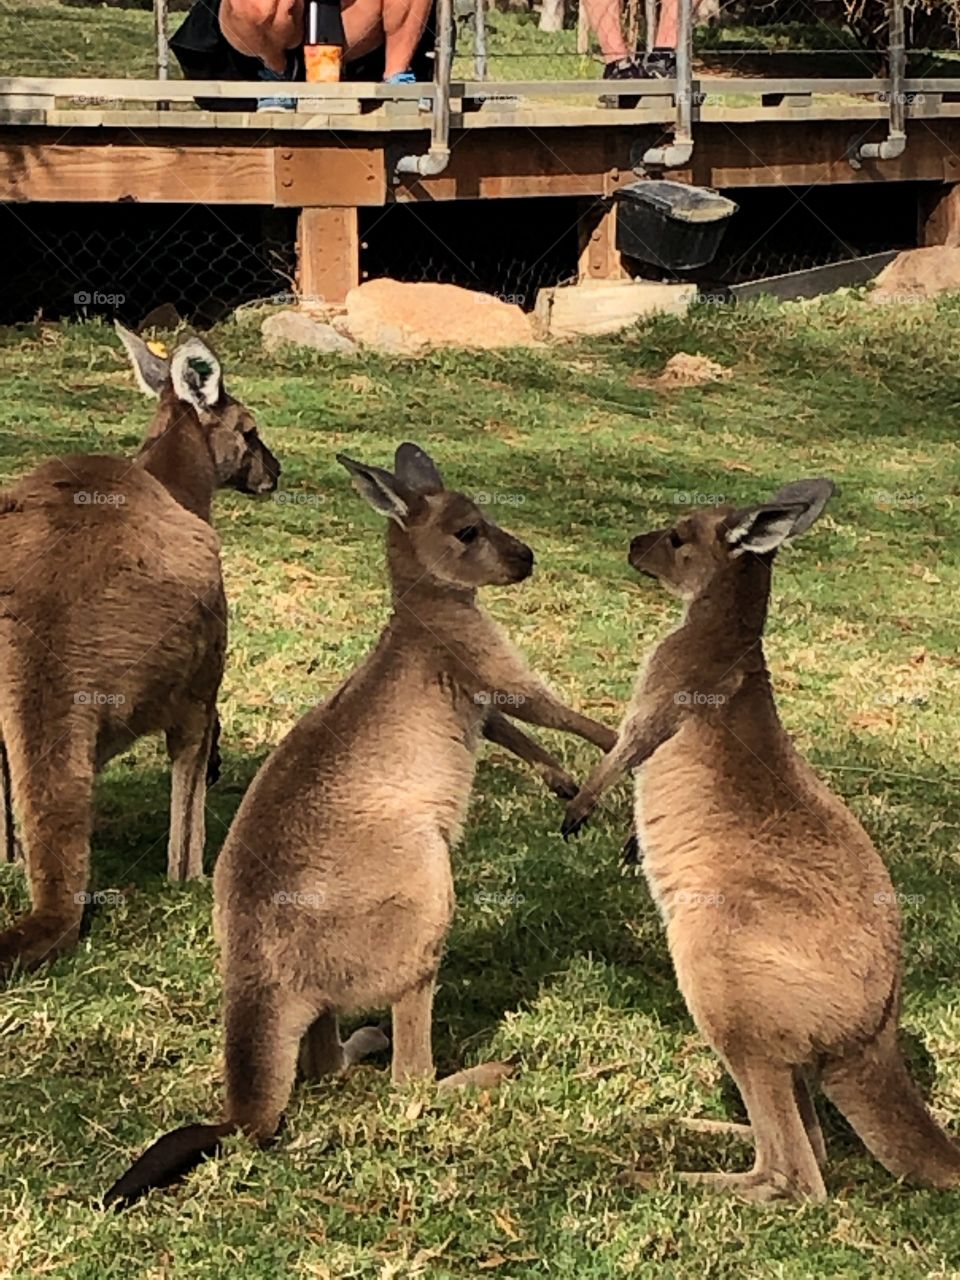 Kangaroos are holding hends